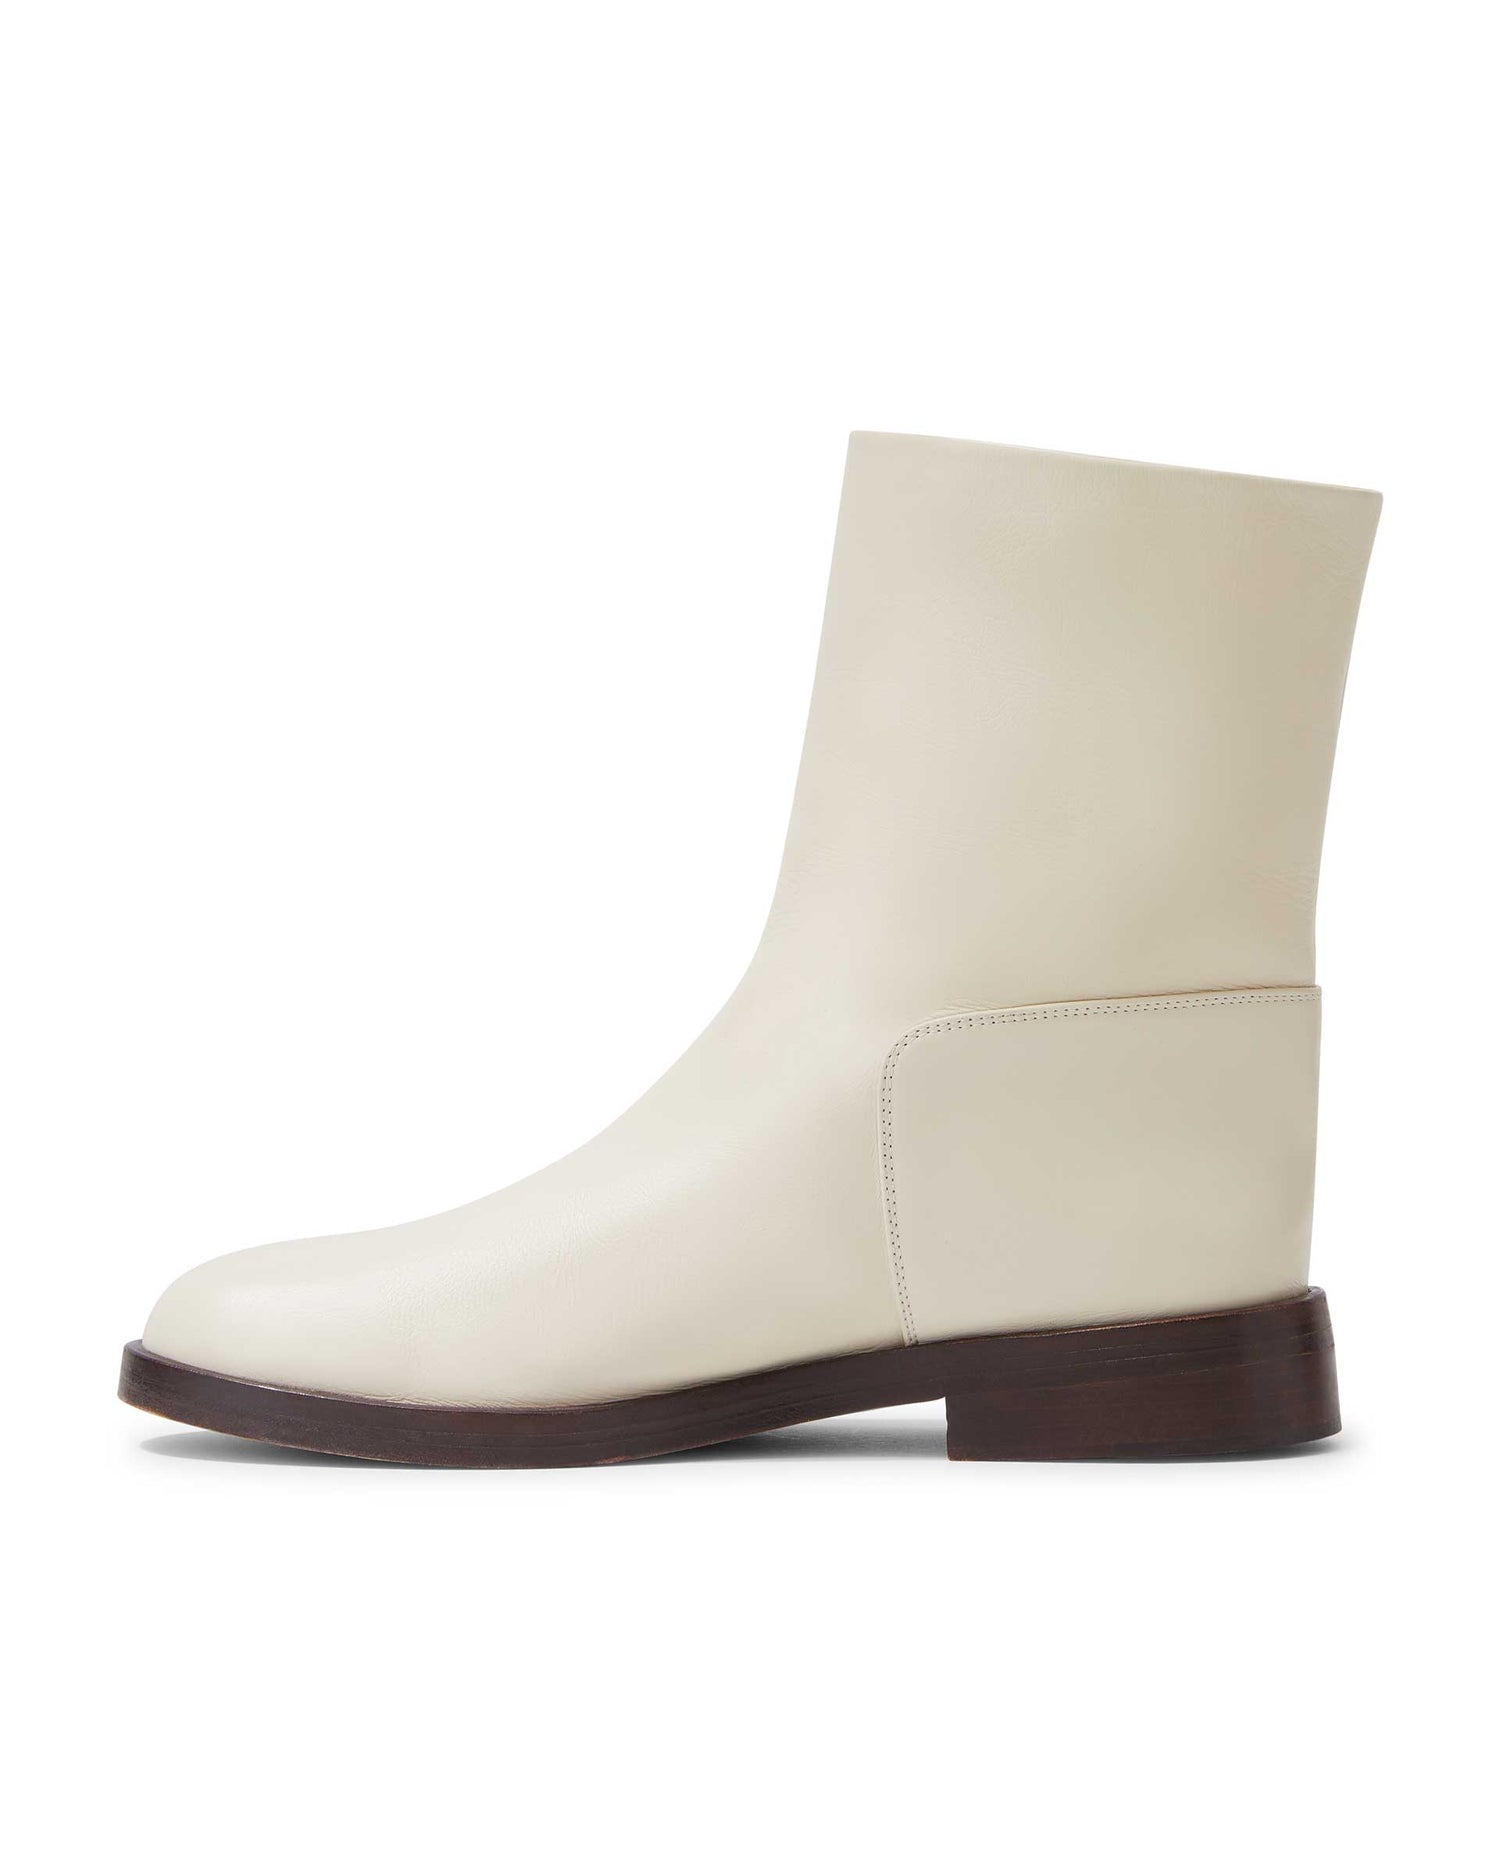 Margaux Ankle Boots in Leather, Limestone